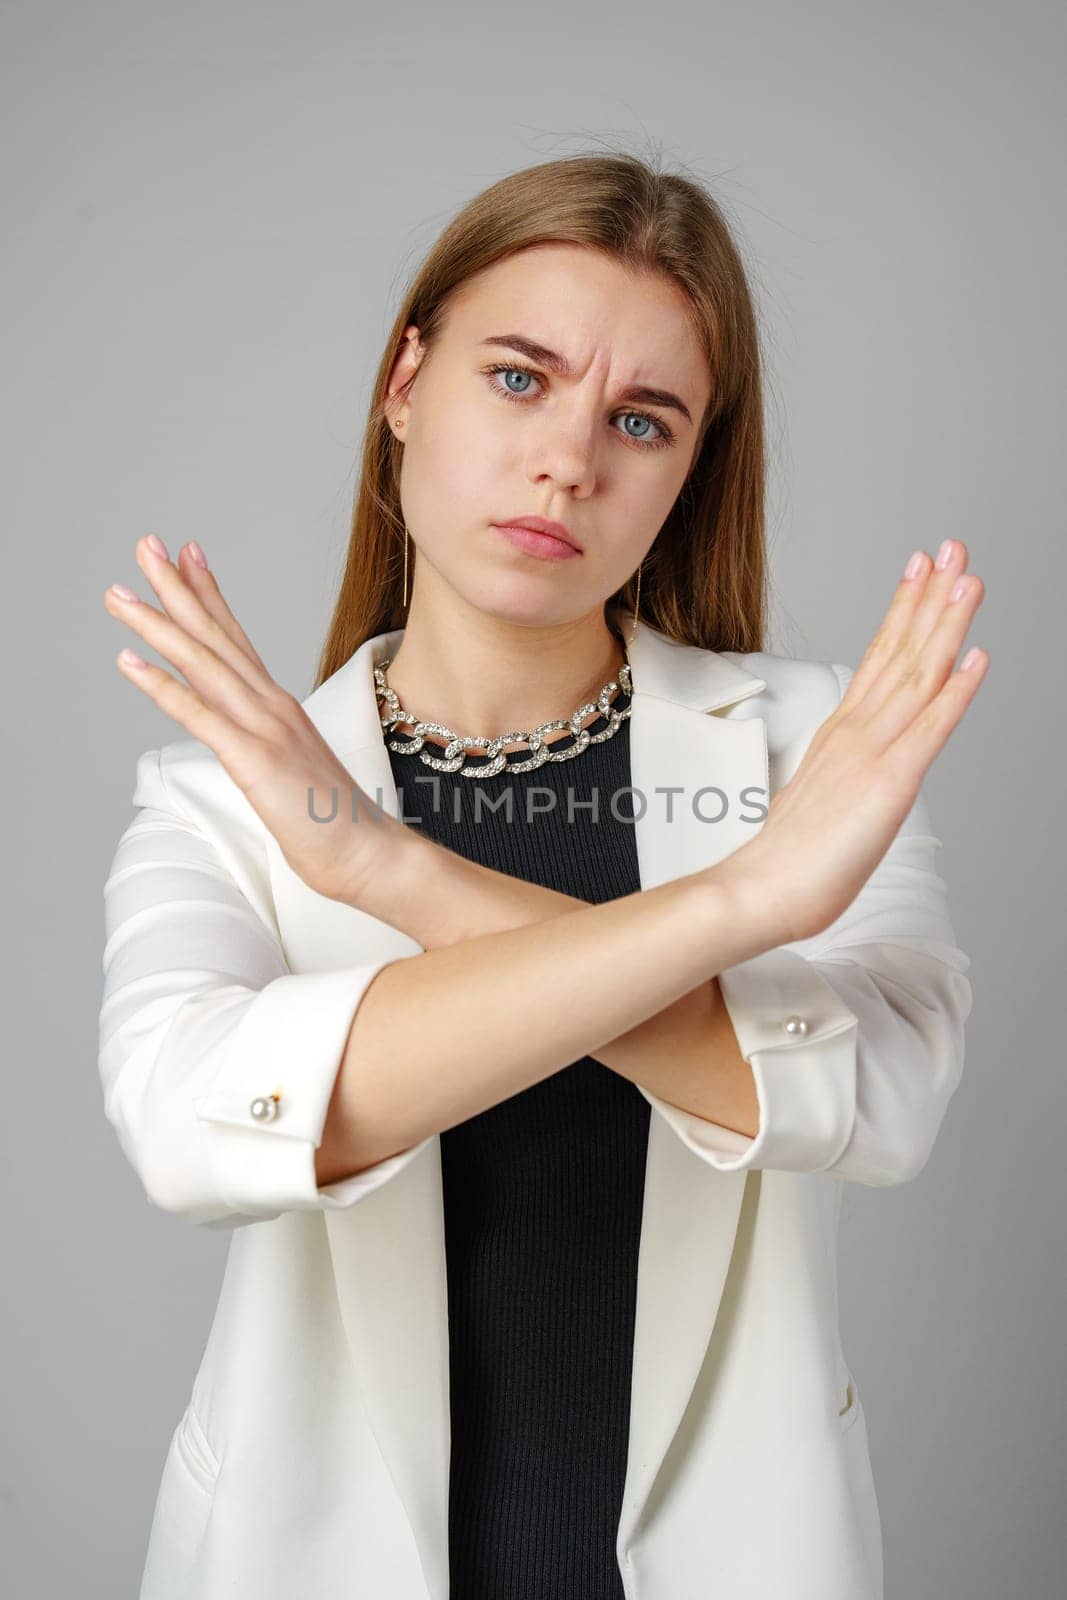 Woman in White Jacket Holding Hands Crossed by Fabrikasimf